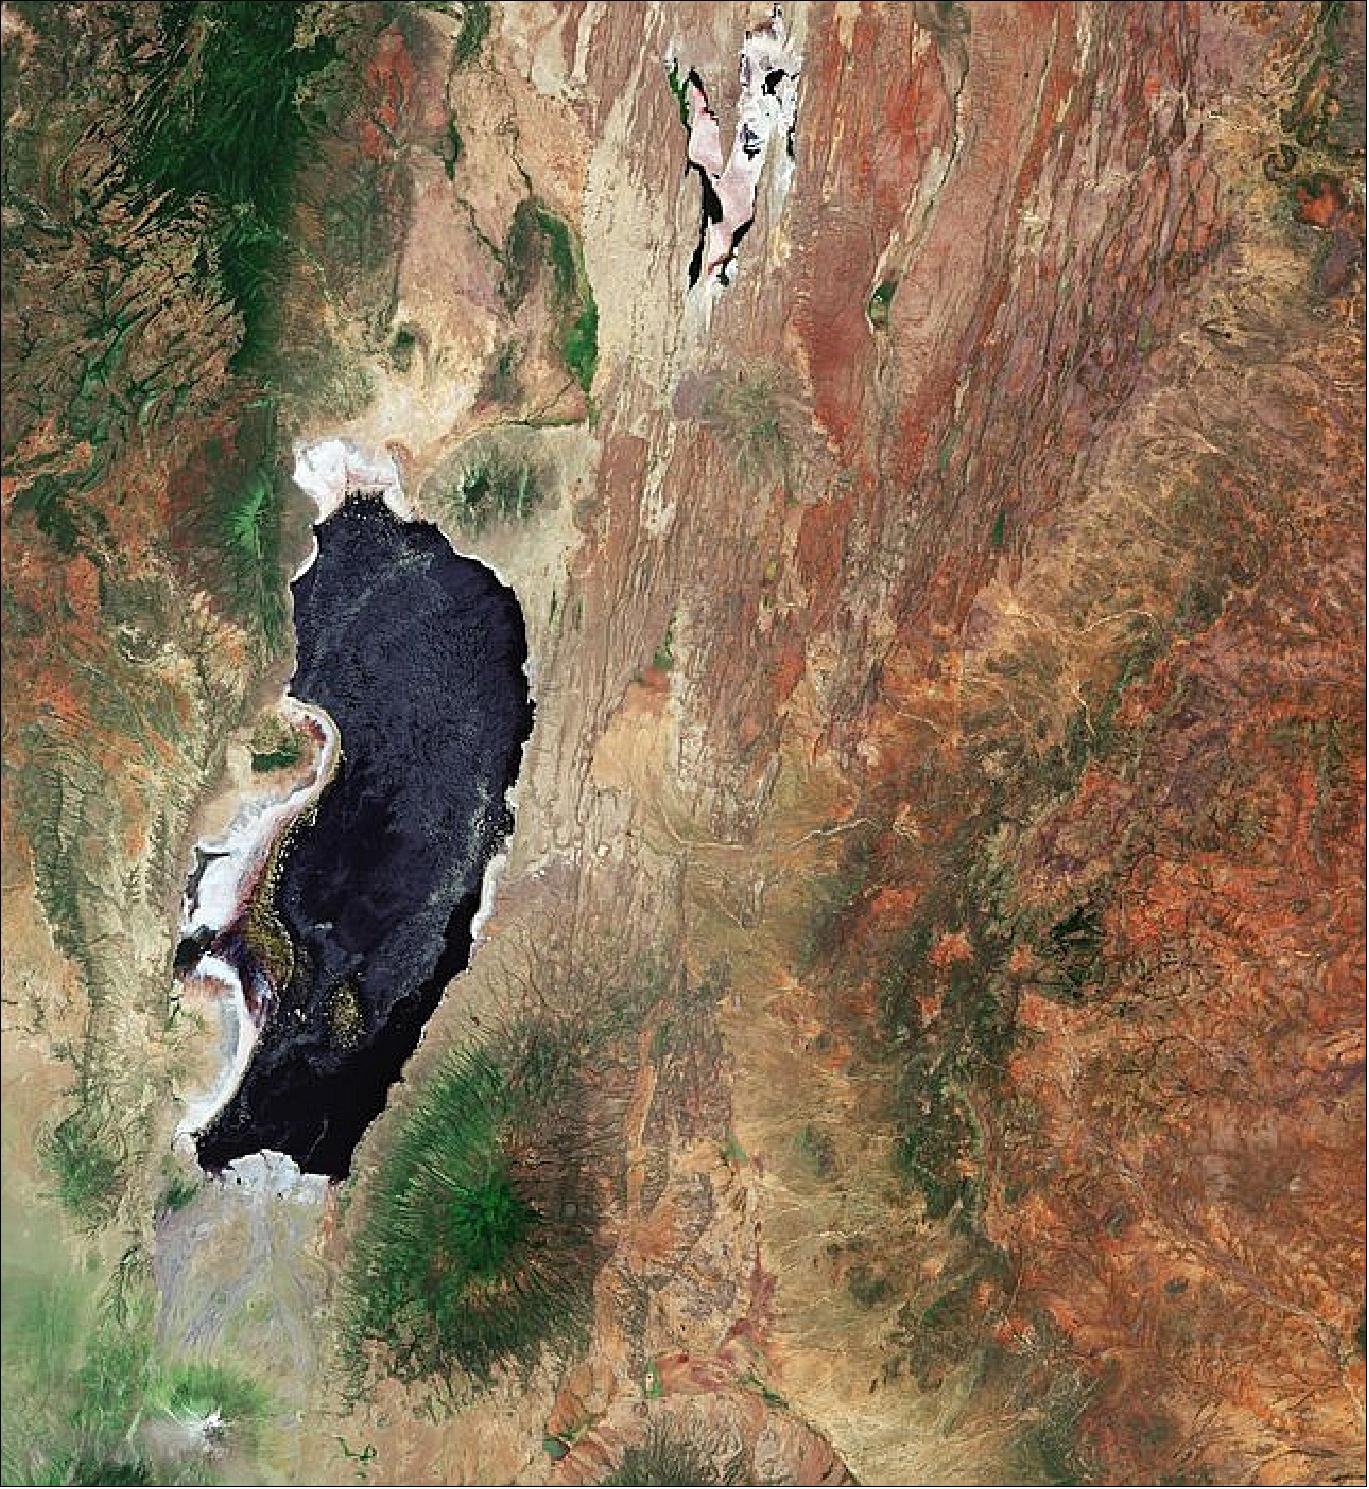 Figure 10: Lake Natron is around 60 km long and is fed mainly by the Ewaso Ng'iro River. Despite its dark color in this image, Lake Natron is often bright red owing to the presence of microorganisms that feed on the salts of the water. Sentinel-2 acquired this image on 3 February 2019, it is also featured on the Earth from Space video program (image credit: ESA, the image contains modified Copernicus Sentinel data (2019), processed by ESA, CC BY-SA 3.0 IGO)